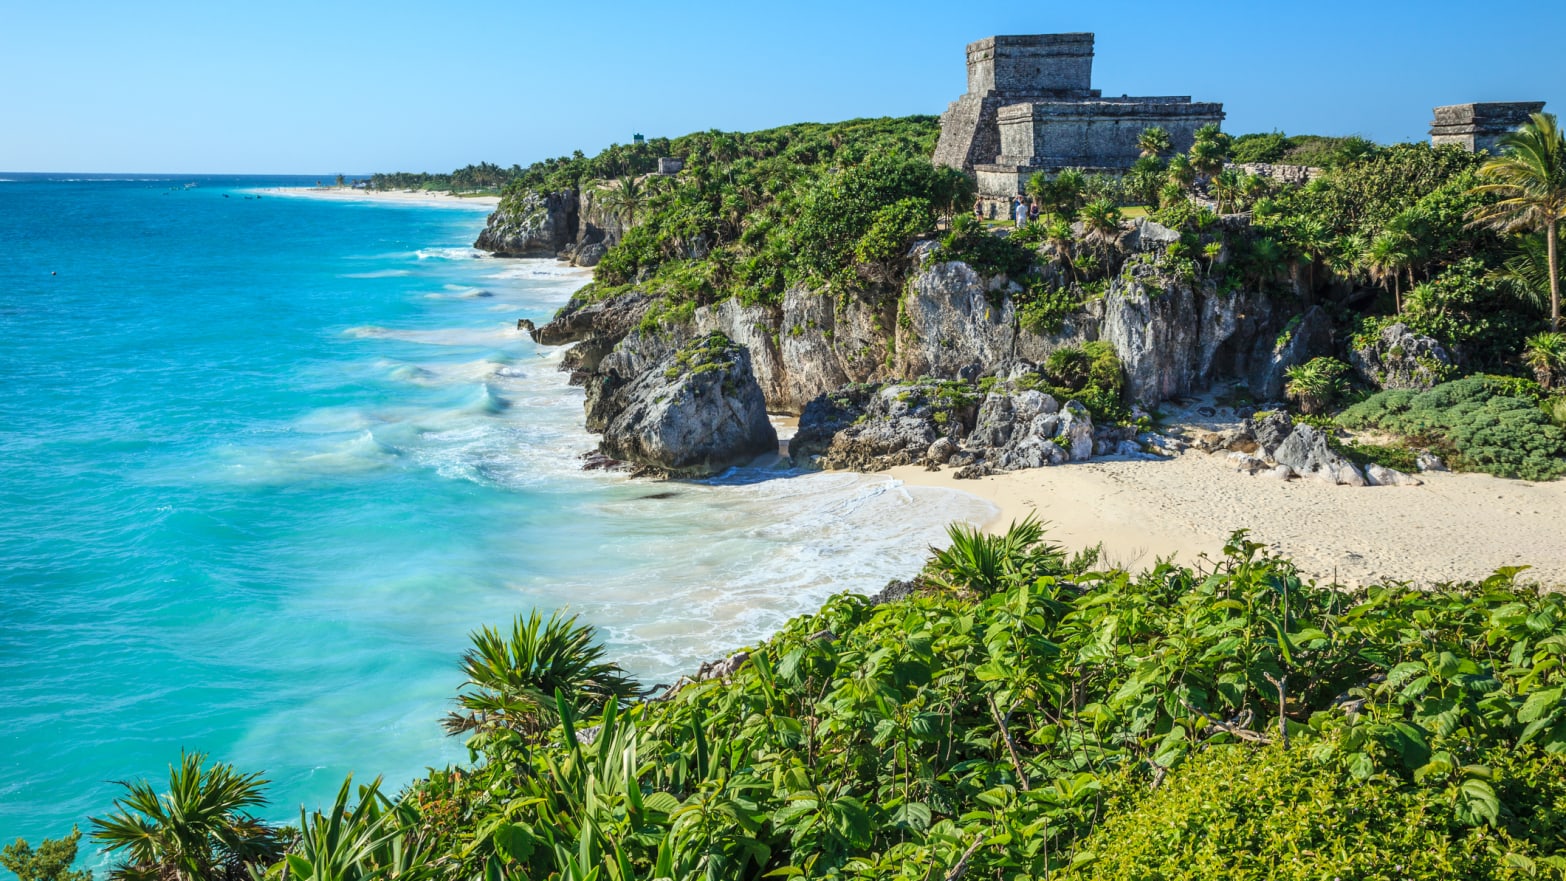 An American woman was killed in Tulum, Mexico, prosecutors said. 